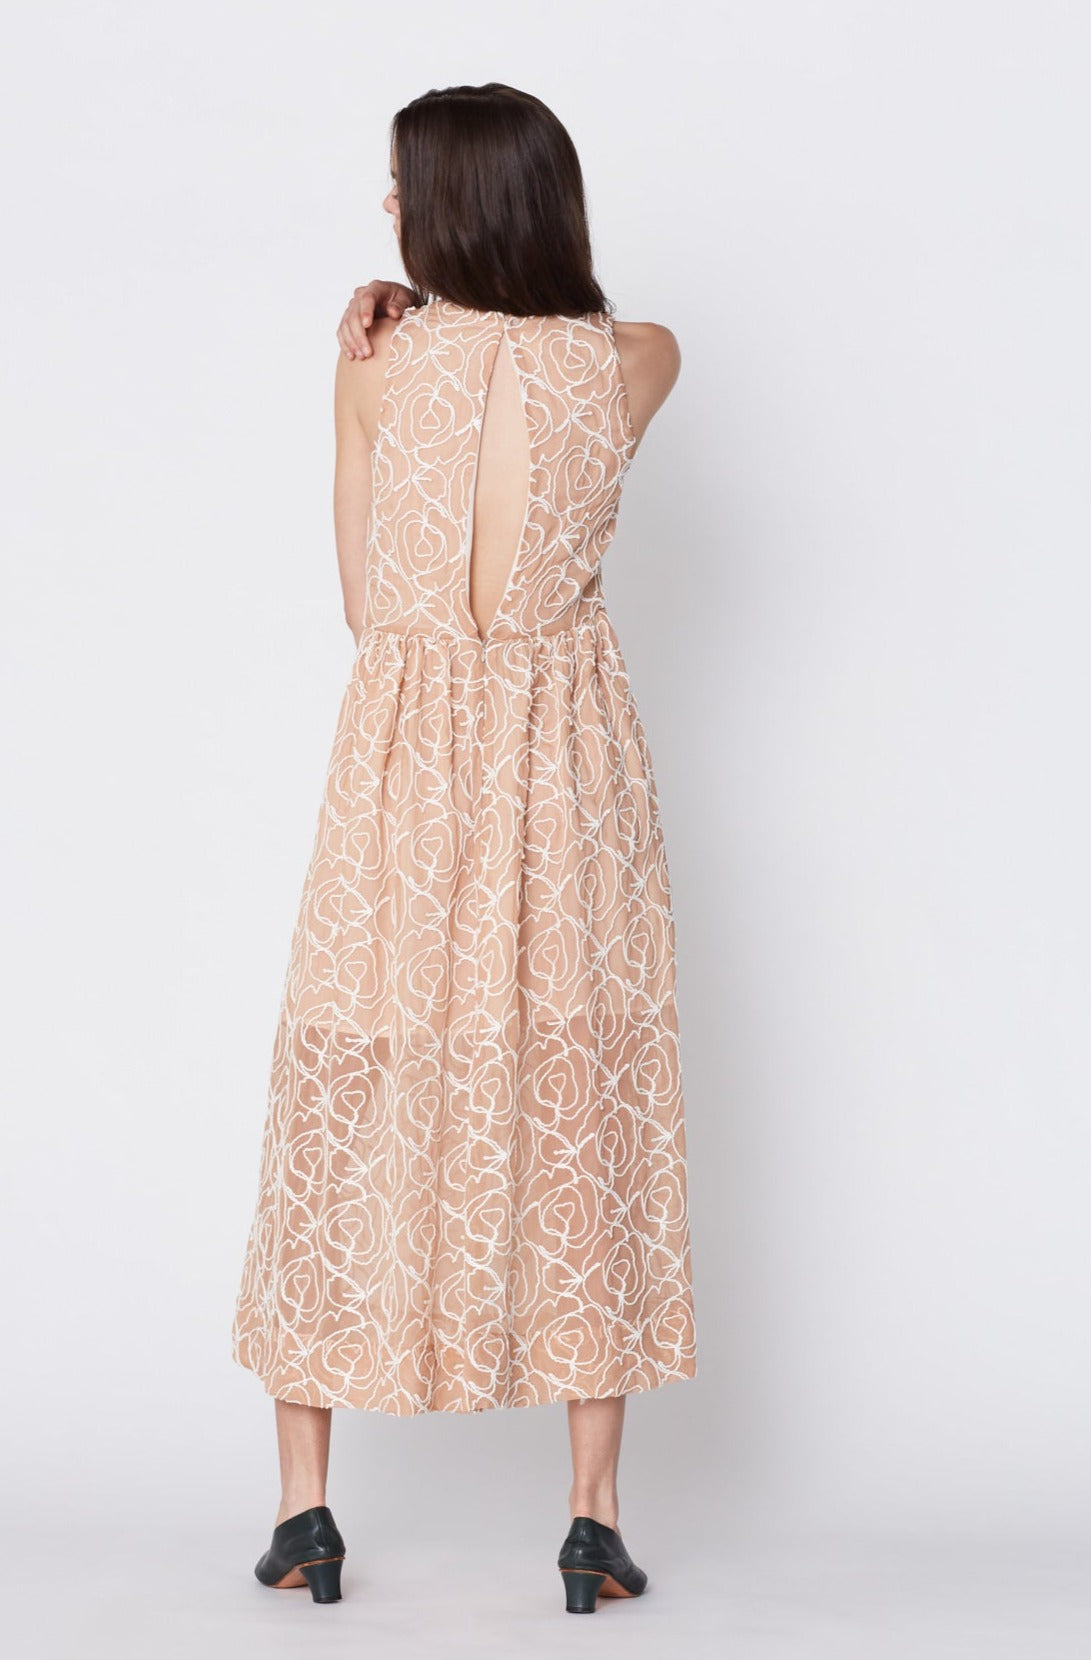 Sonny Dress in Italian Silk Chiffon with Cotton Rope Embroidery. Made in Atlanta, ethically and sustainably, by slow fashion designer Megan Huntz. 